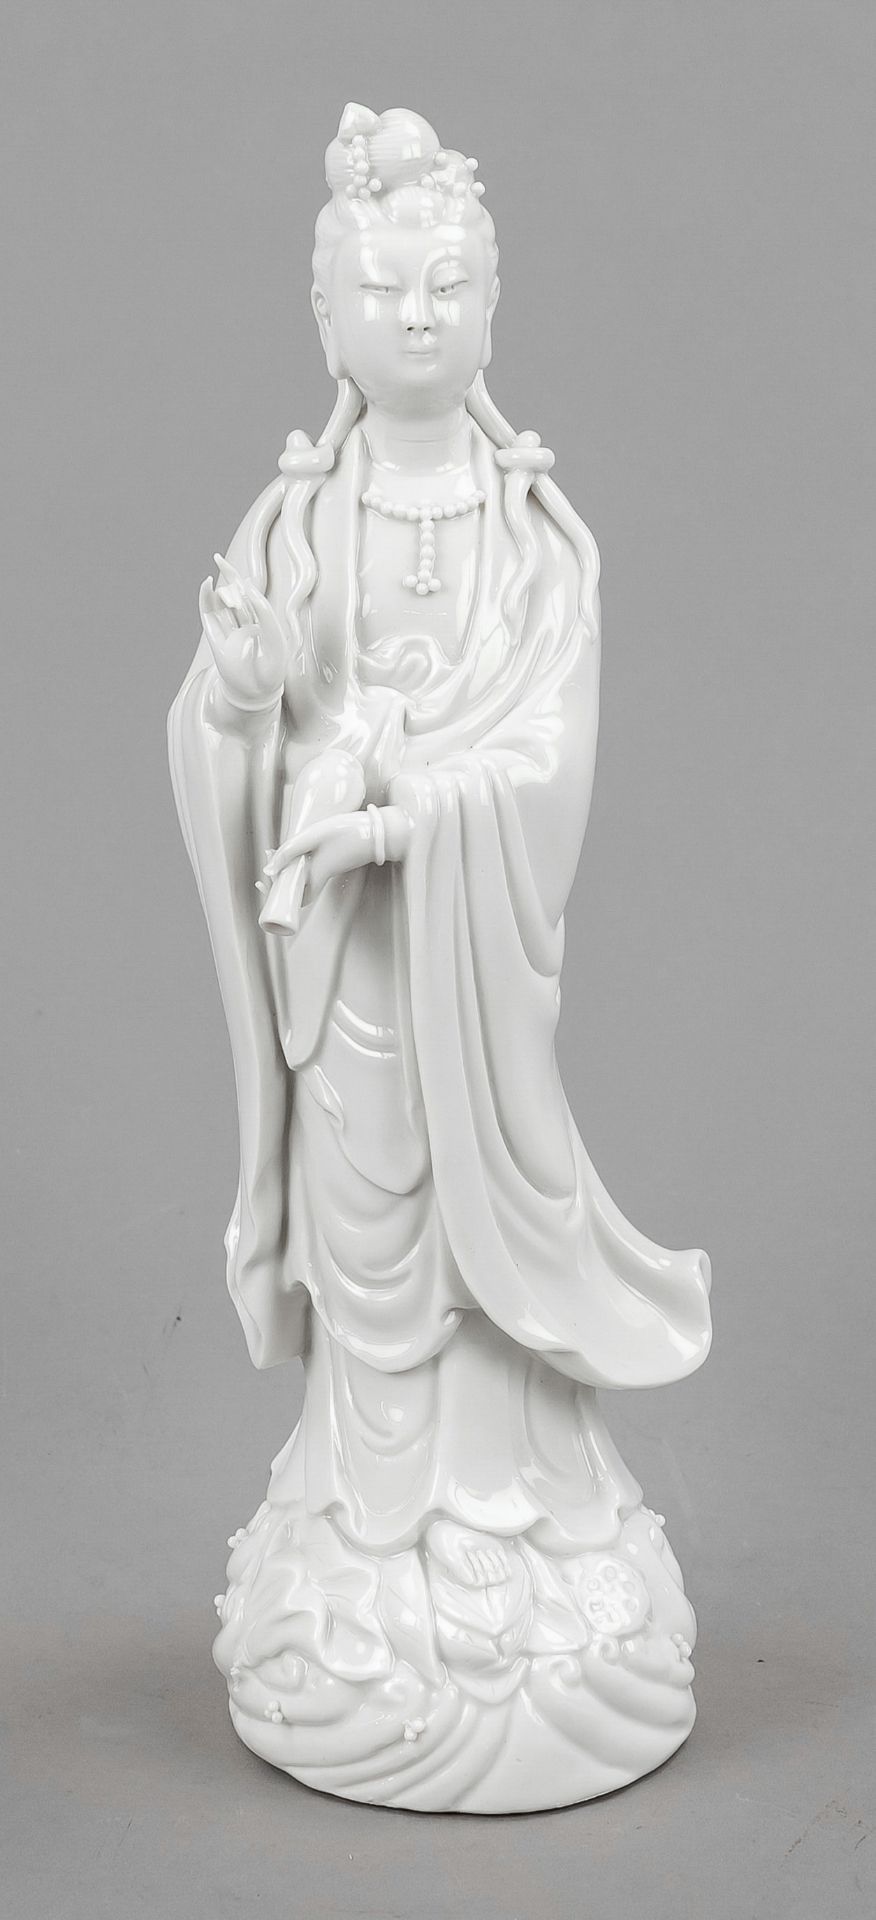 Guanyin with ambrosia bottle Blanc de Chine, China, 19th/20th century, Dehua porcelain of the